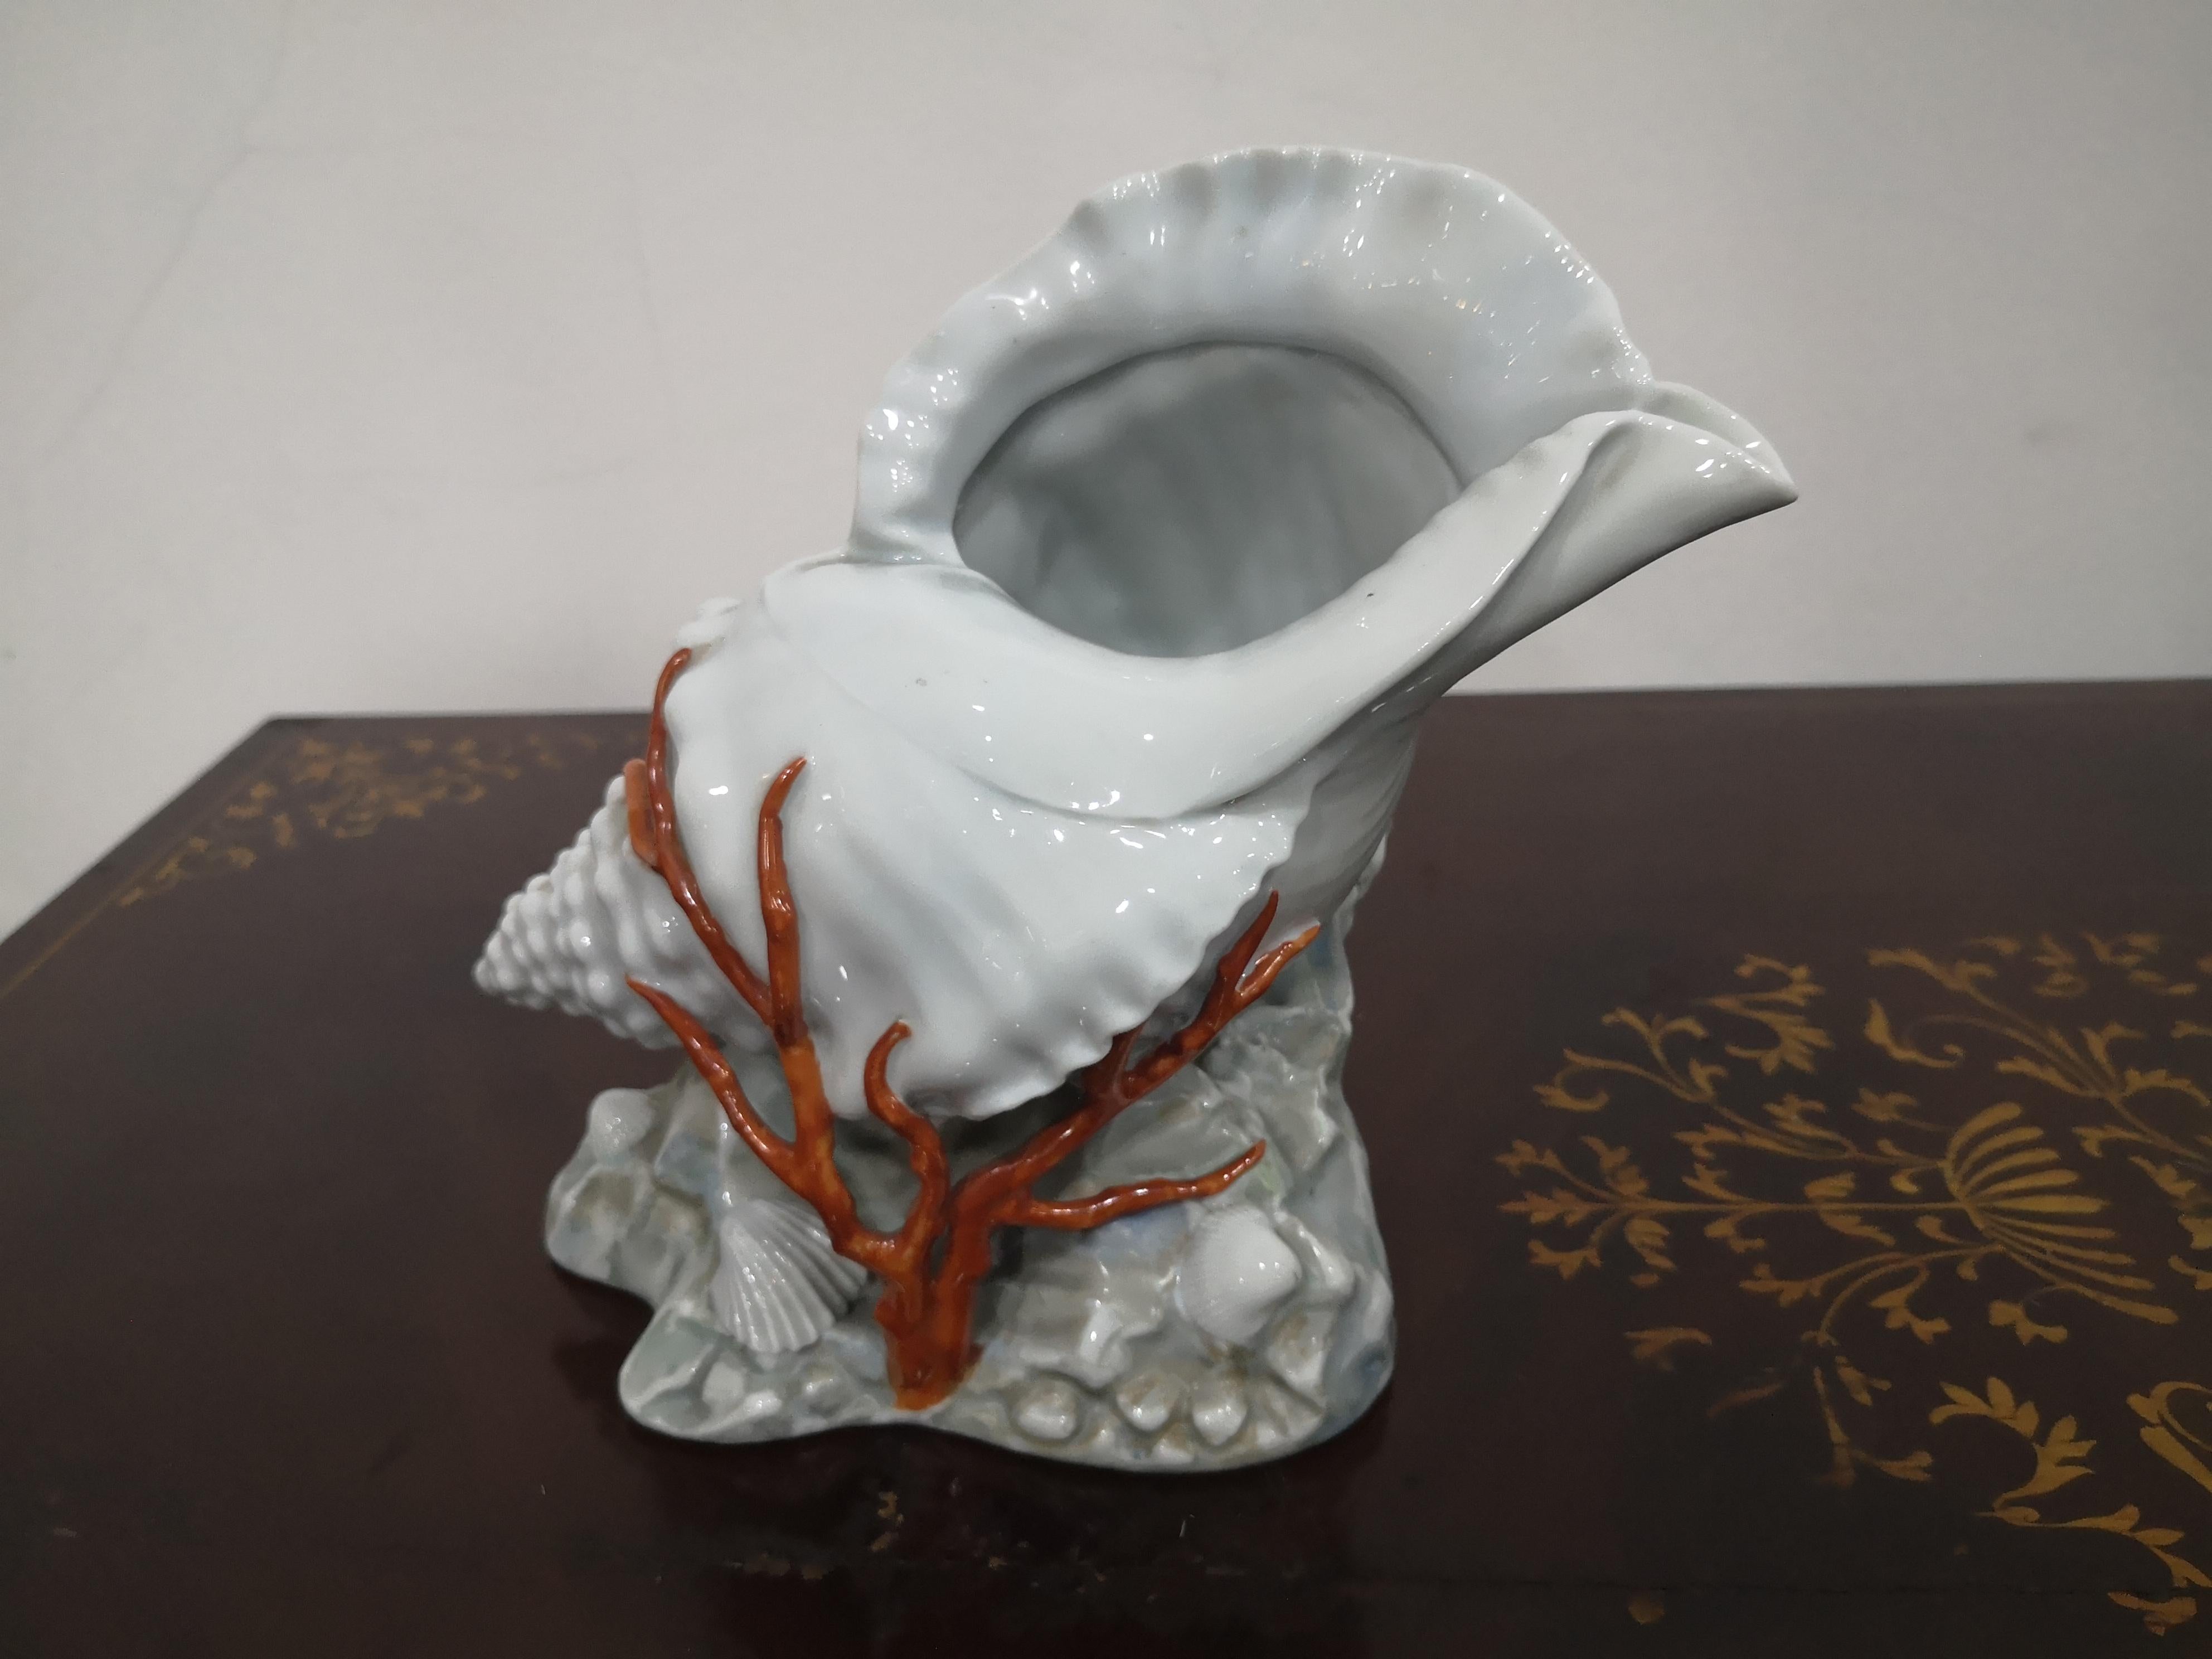 Beautiful Capodimonte porcelain shell with hand-painted coral. The body is in splendid condition, no signs of wear or broken or missing parts. Marked on the bottom, see photos for details. Available to send additional detail photos upon request.